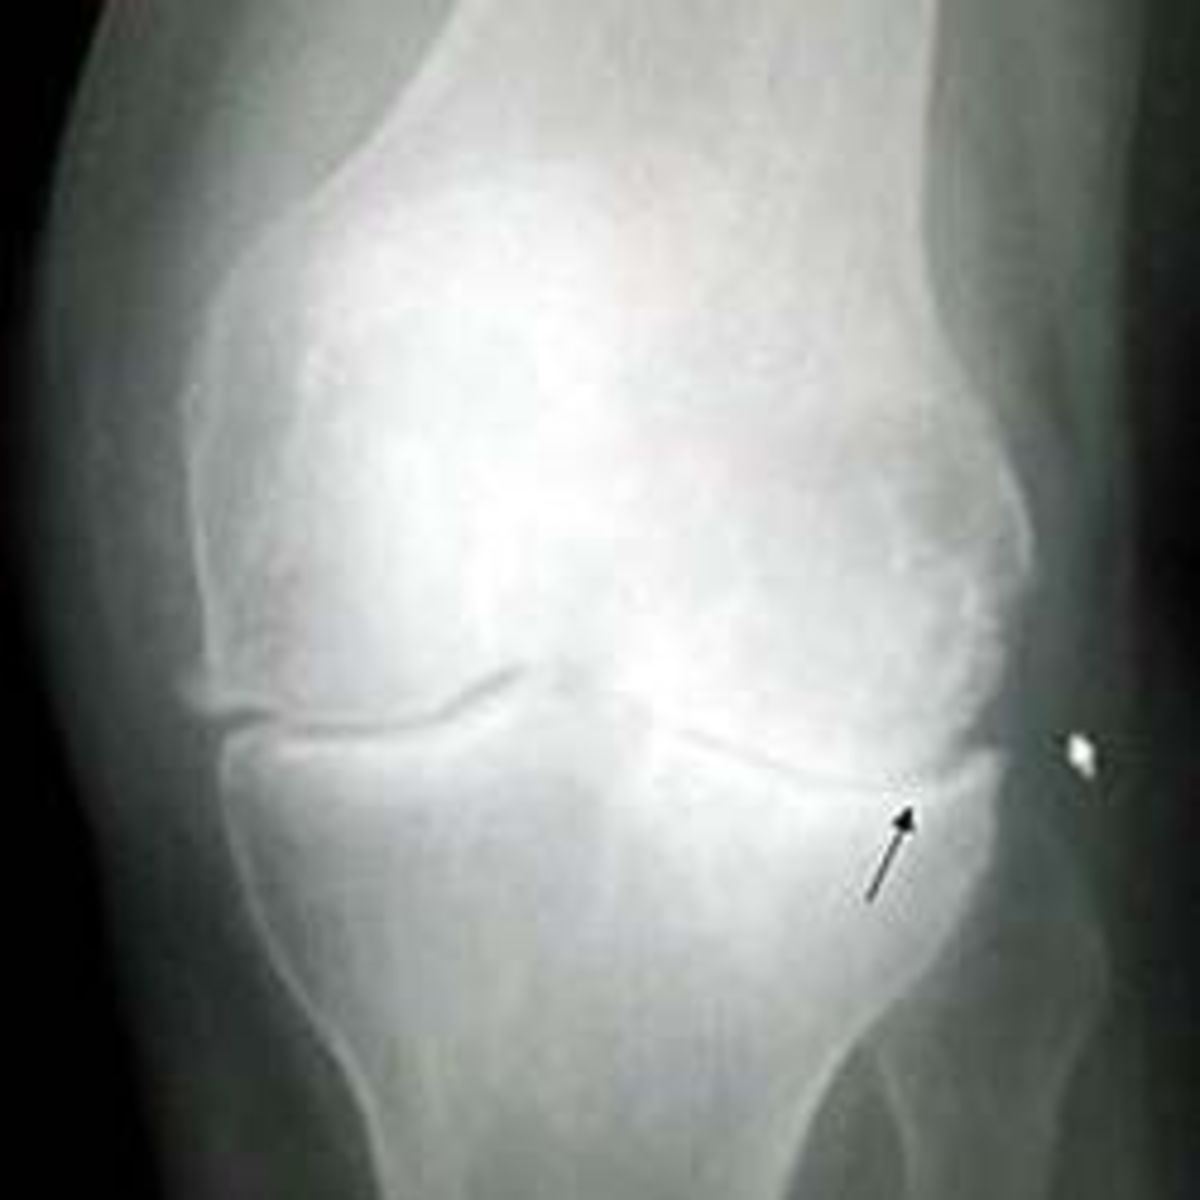 total-knee-replacement-surgery